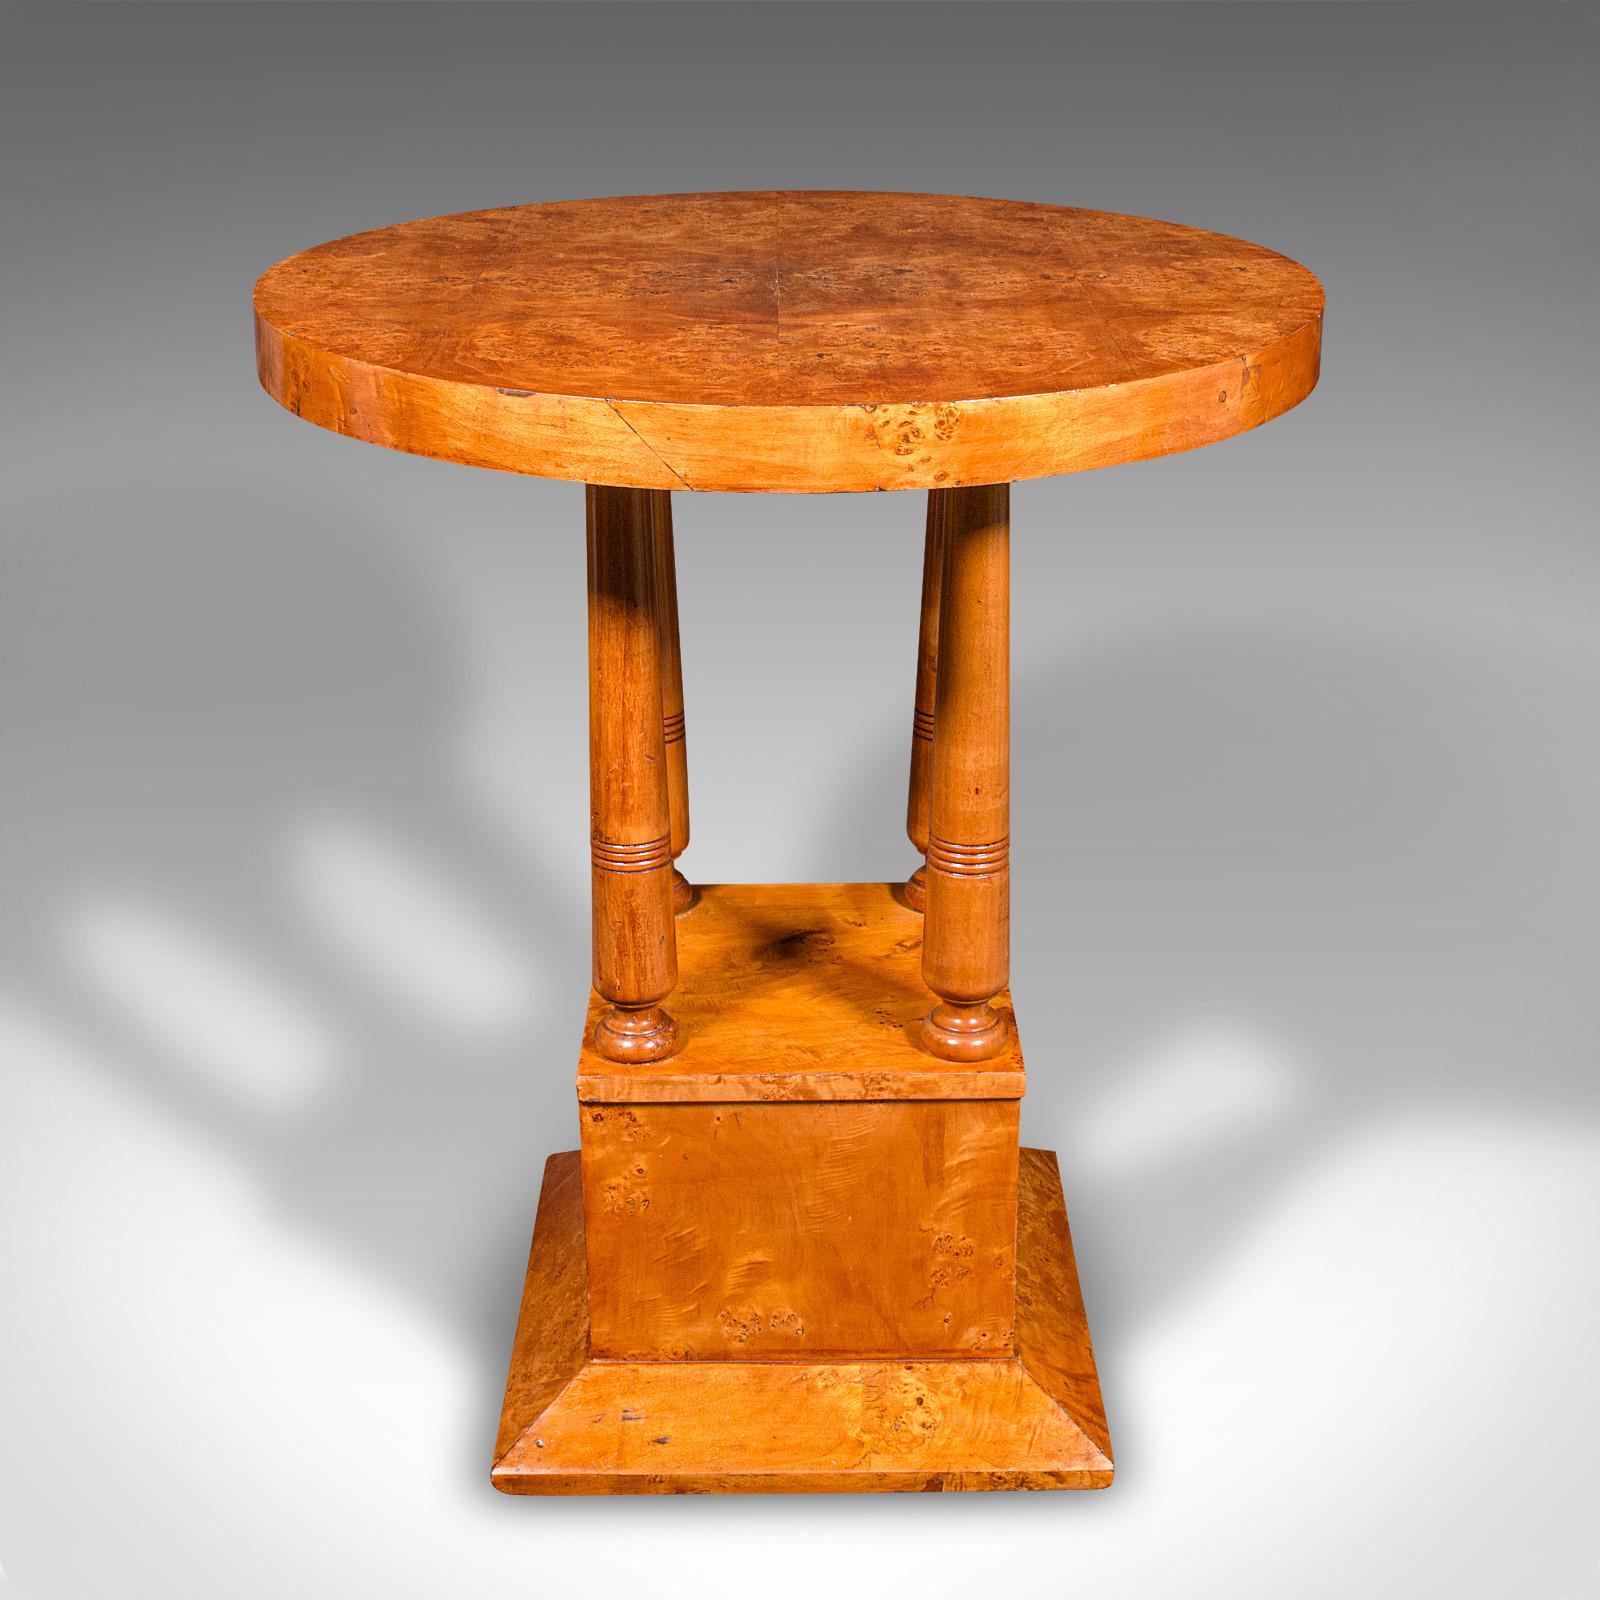 20th Century Vintage Podium Hall Table, French, Birds Eye Maple, Lamp, Side, Art Deco, C.1930 For Sale